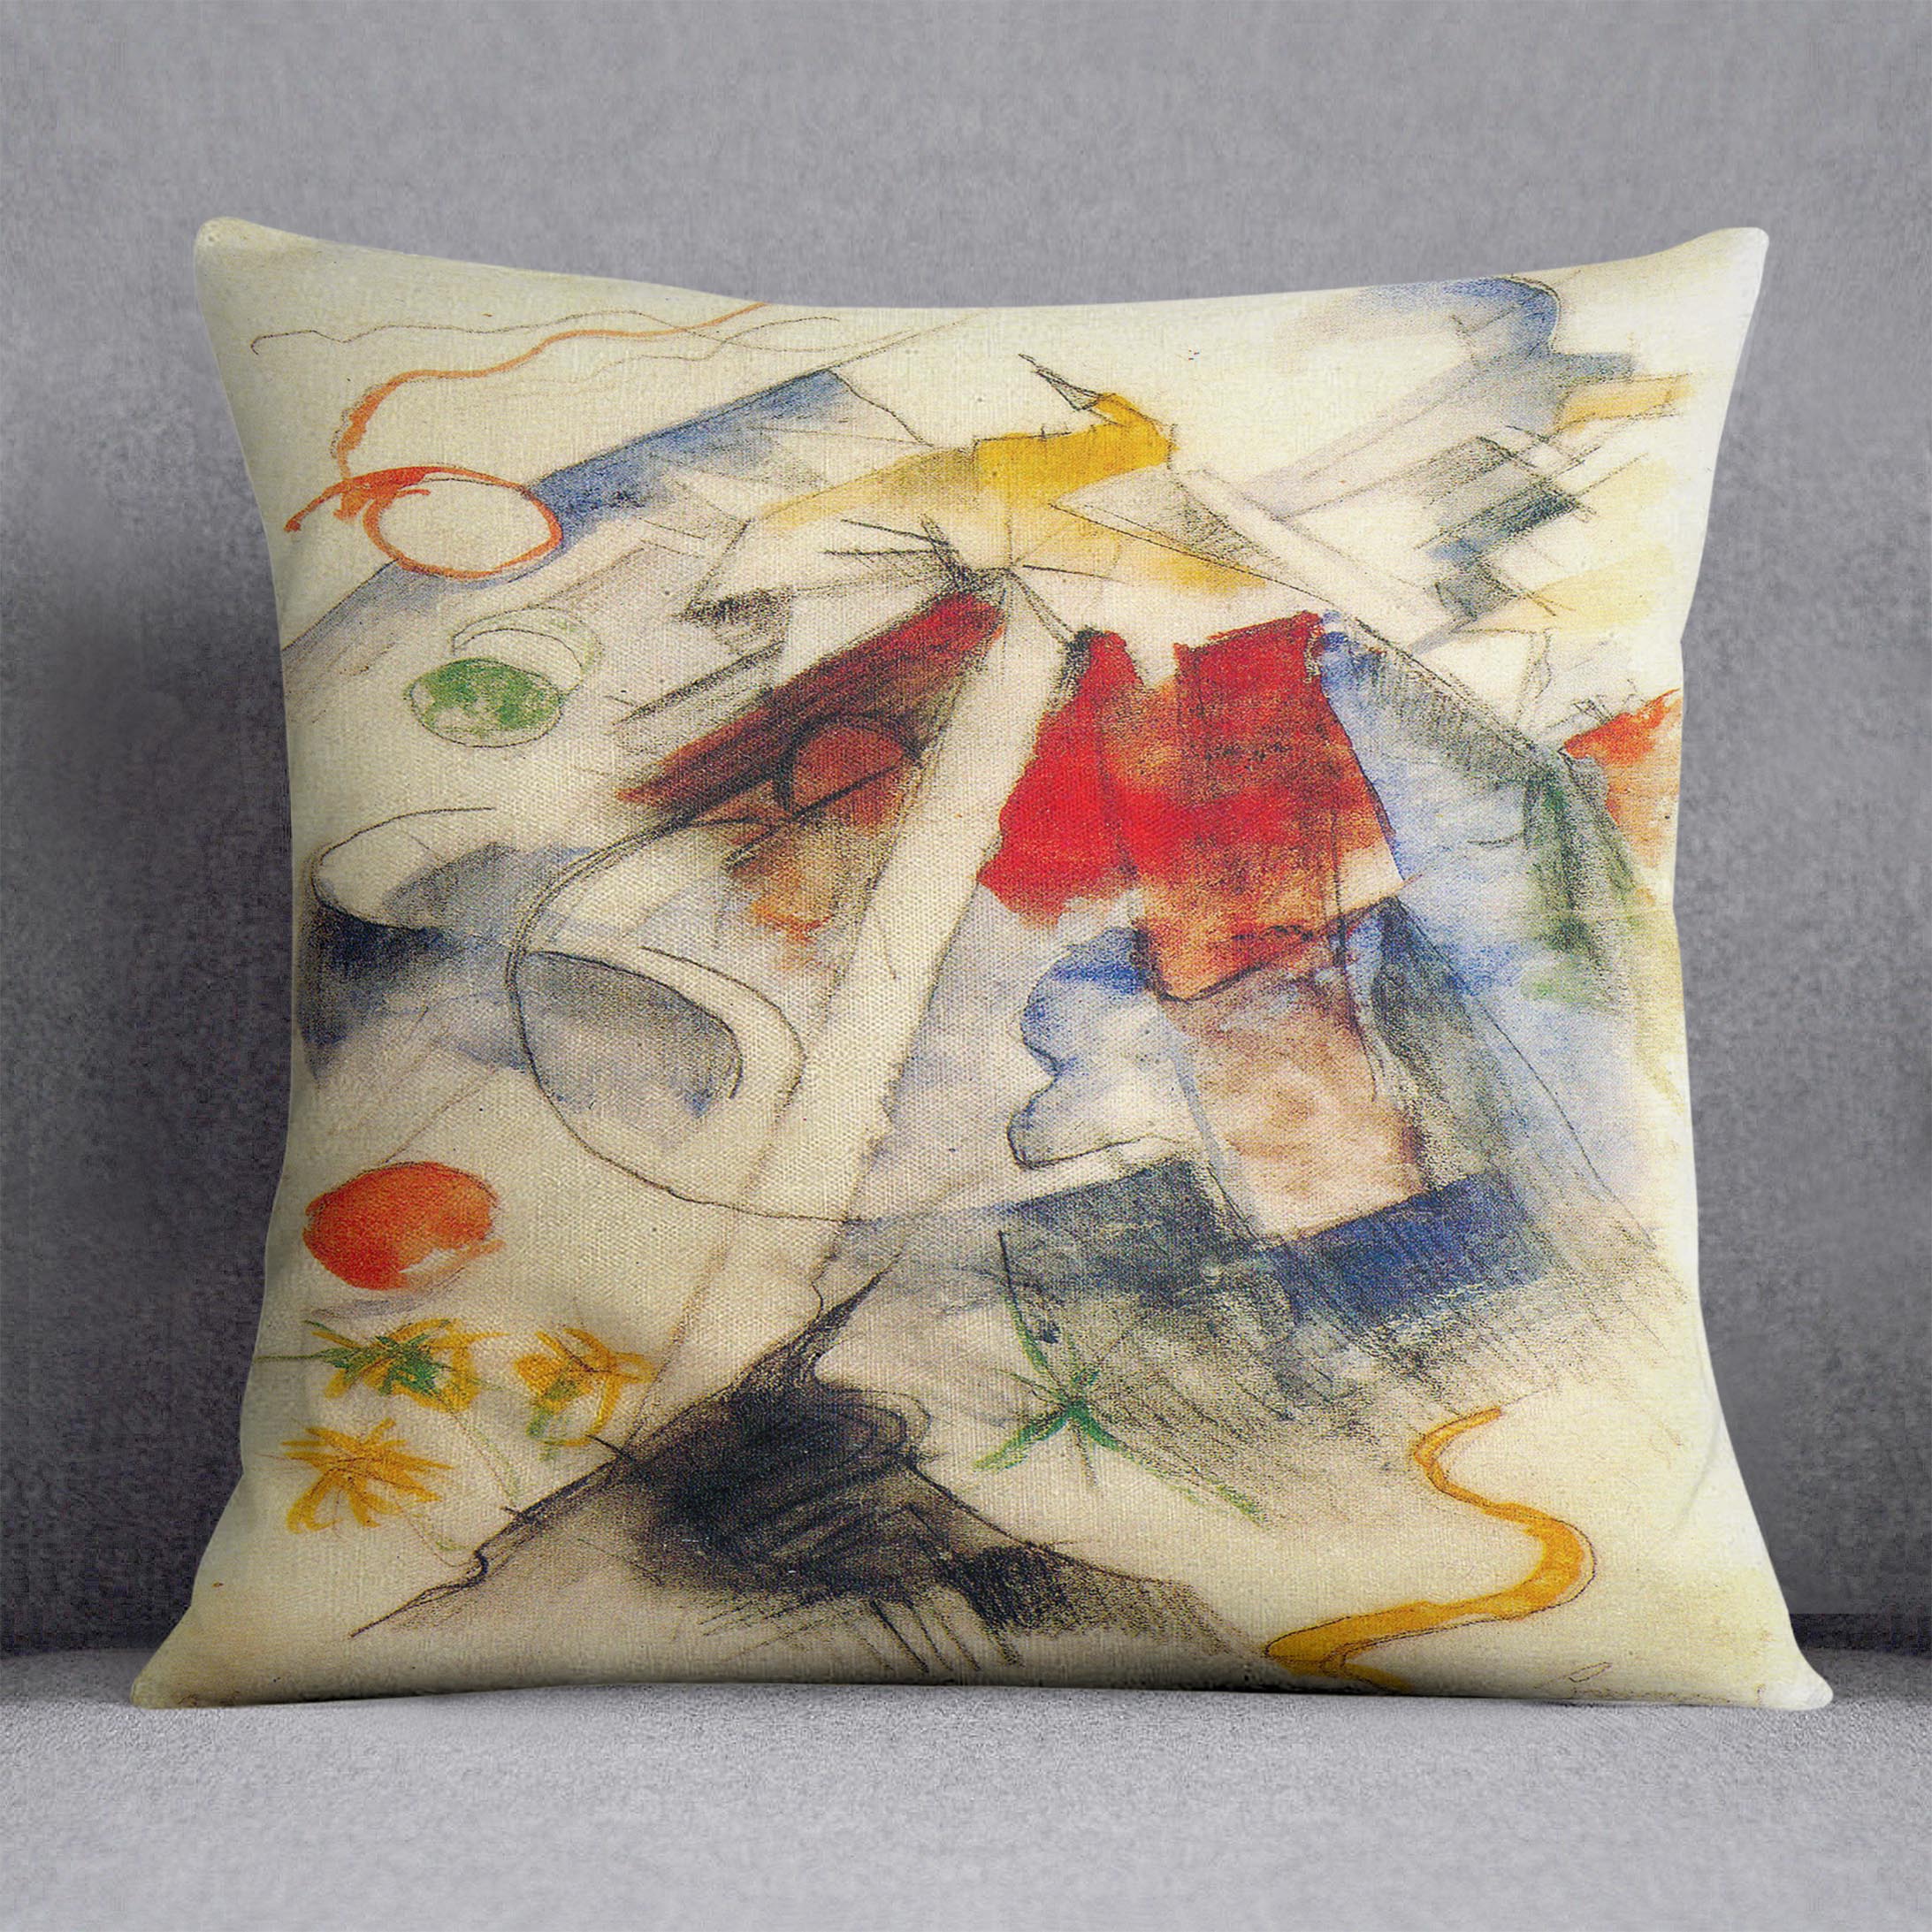 Sketch of the Brenner road 1 by Franz Marc Cushion